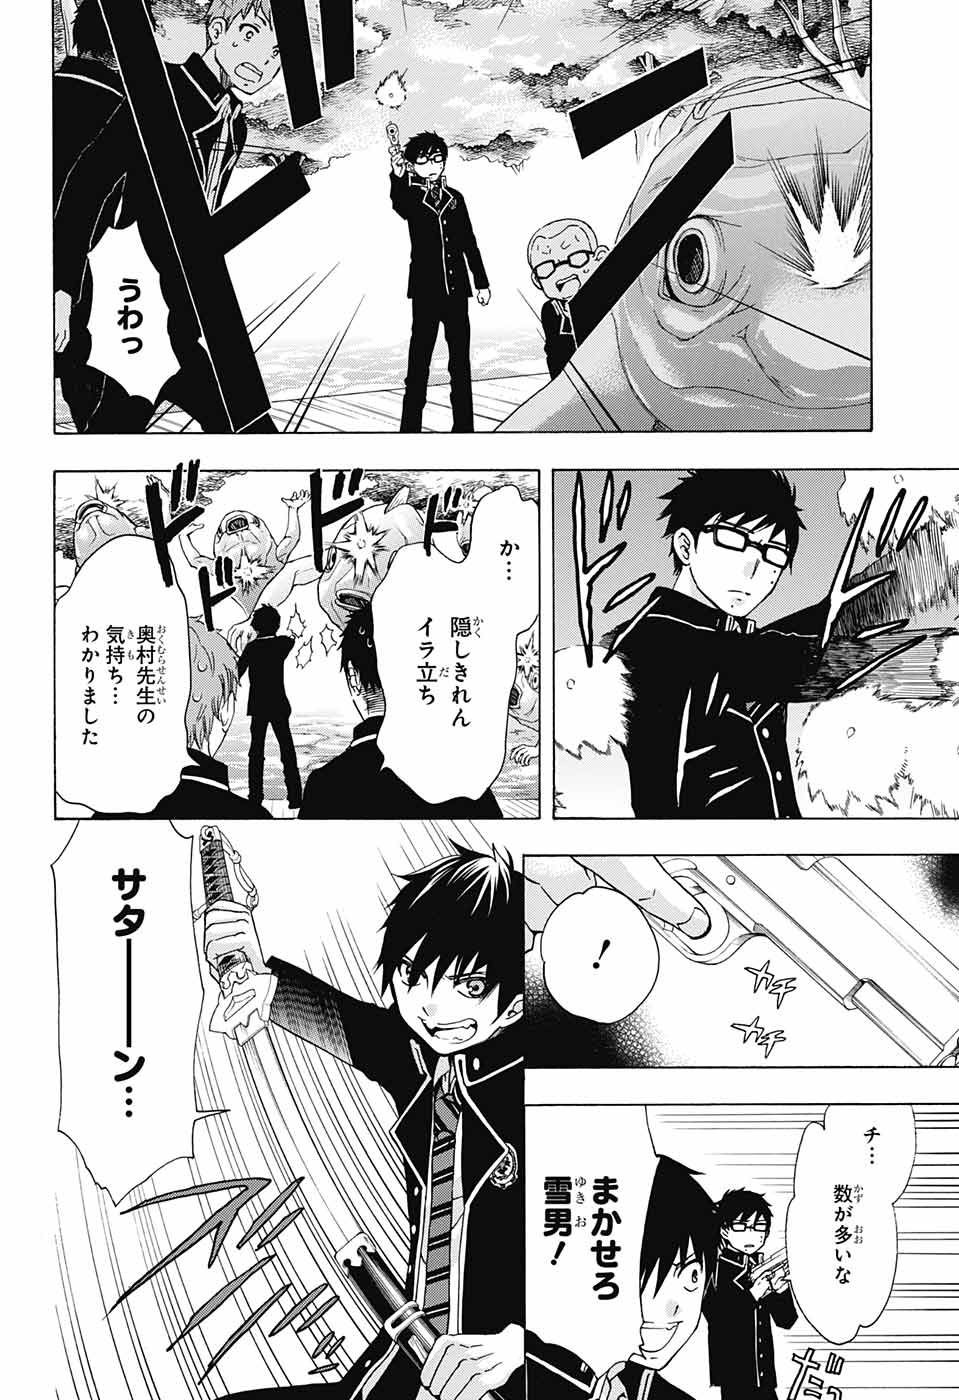 Ao no Exorcist - Chapter 101 - Page 38